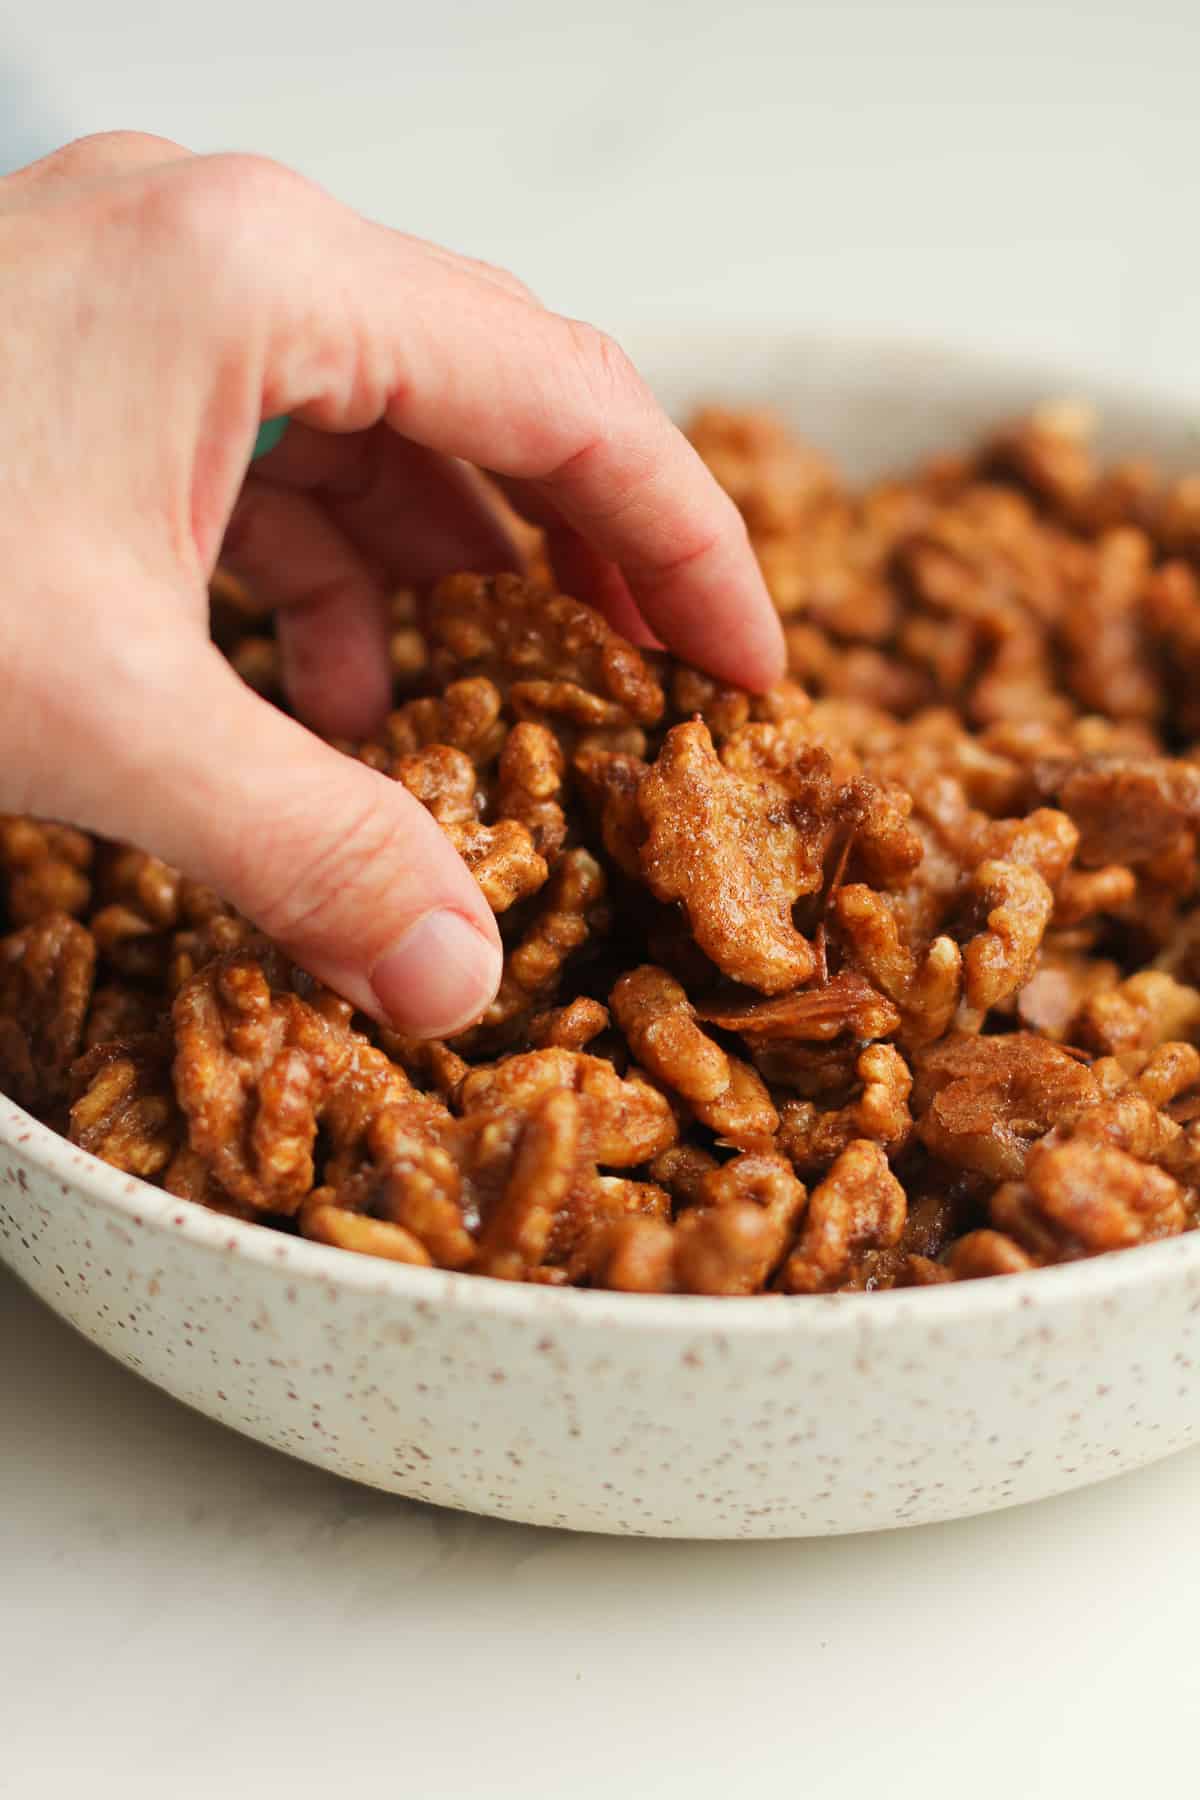 Side shot of a hand in a bowl of candied walnuts.